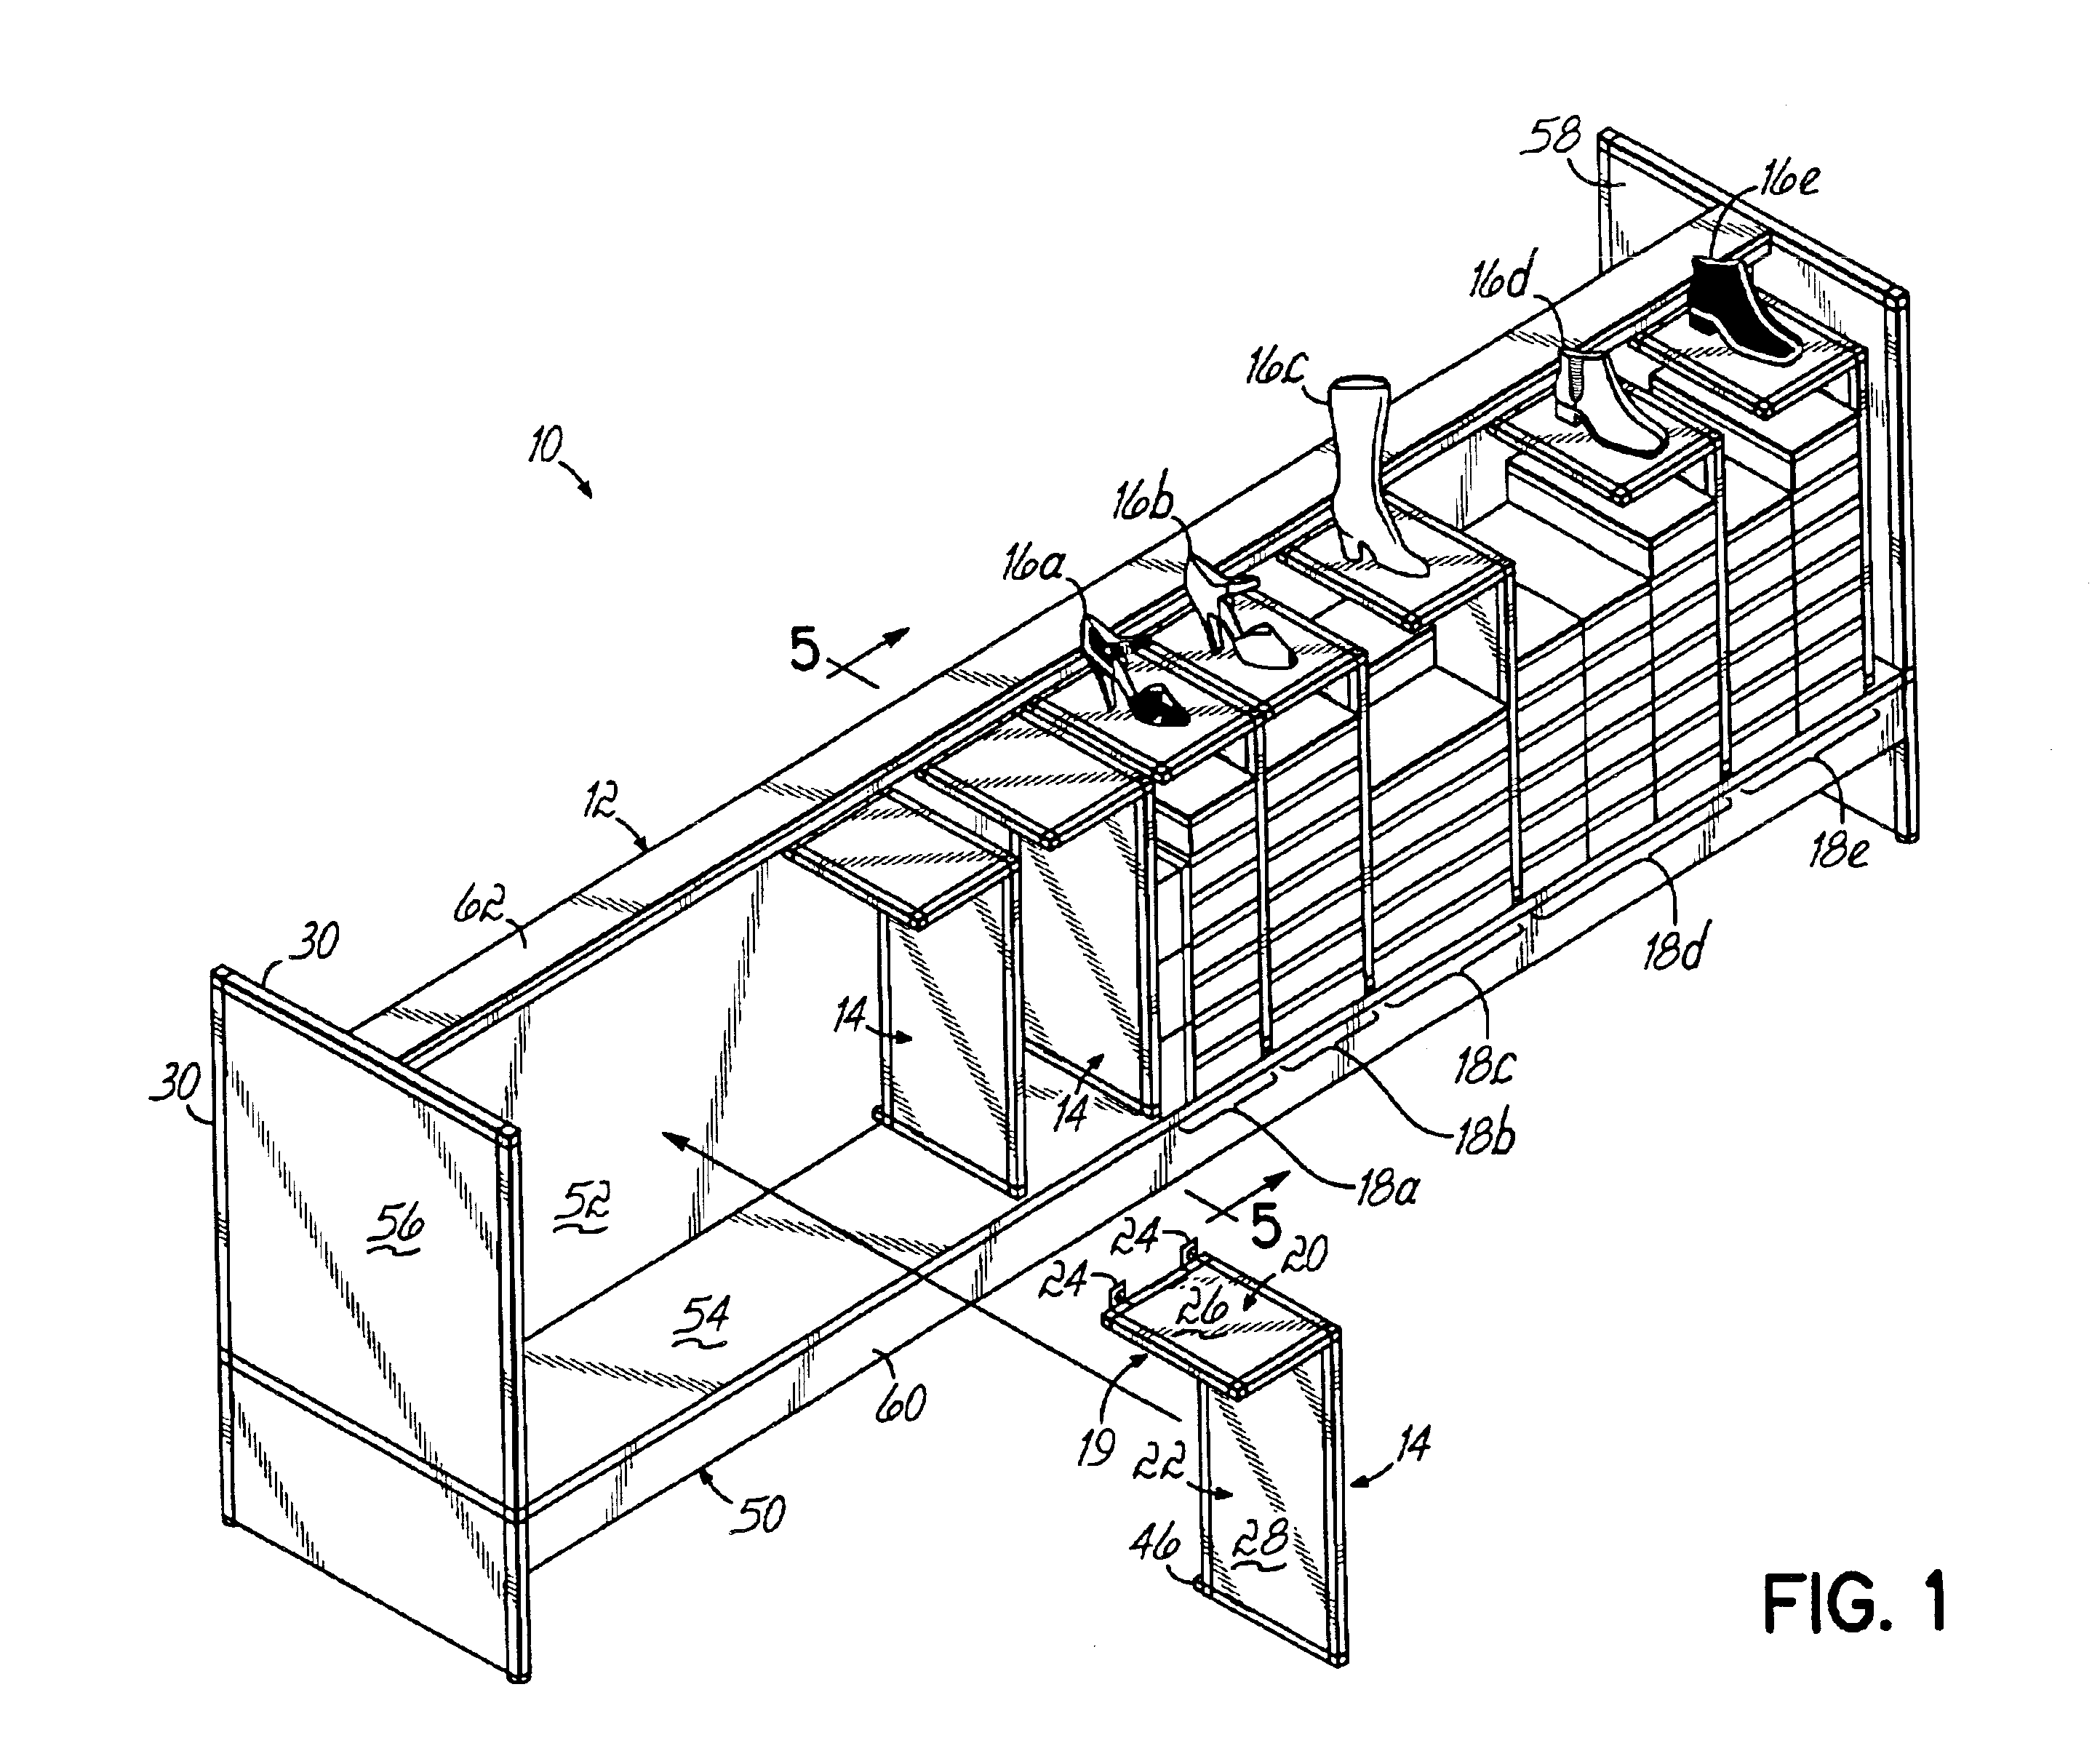 Modular footwear display and storage system and method